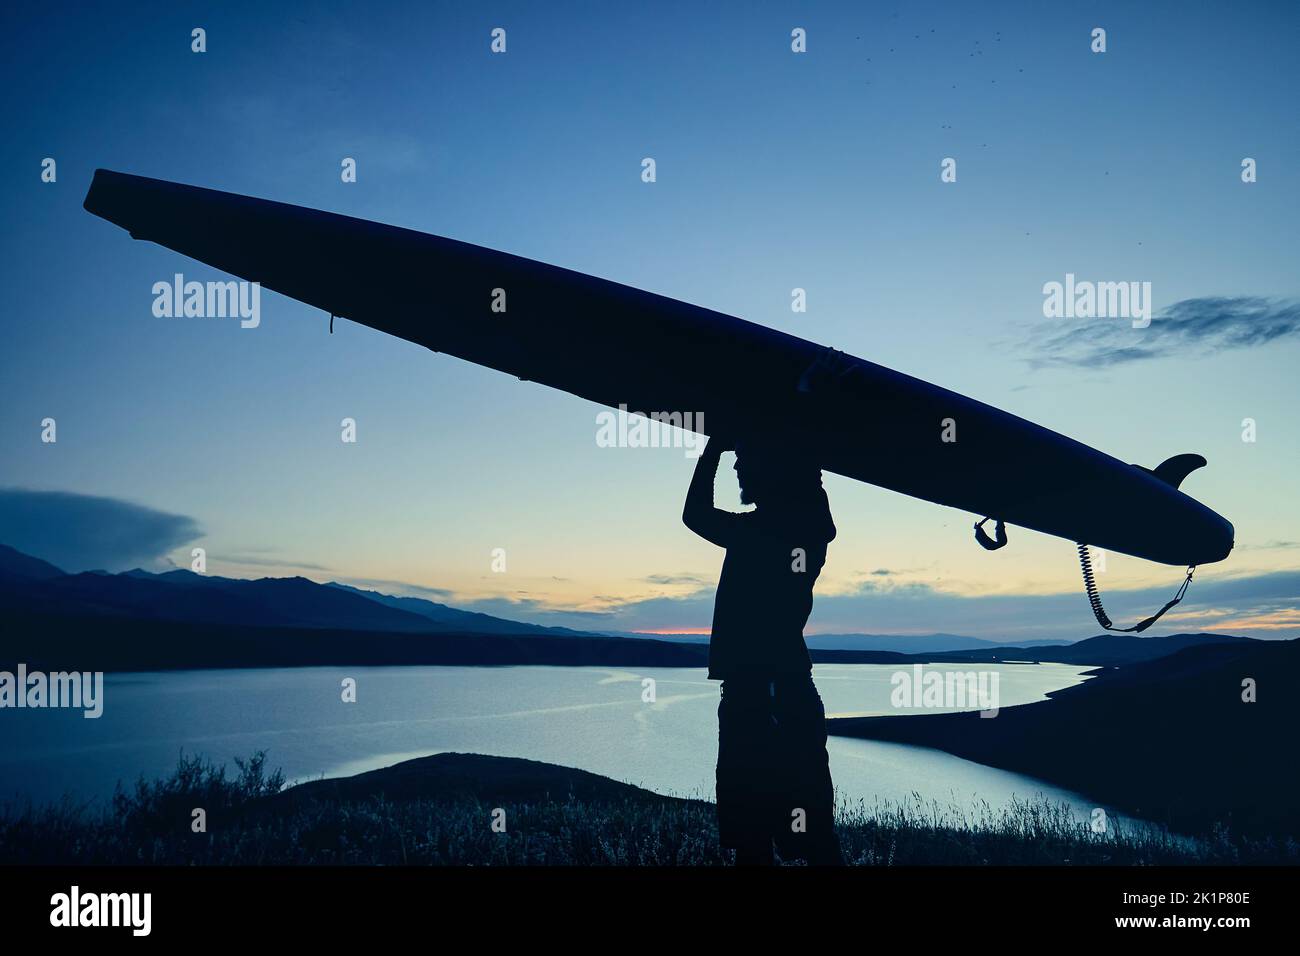 Bearded Man in silhouette holding SUP board near lake at sunset in Kazakhstan. Stand up paddle boarding outdoor active recreation in nature. Stock Photo